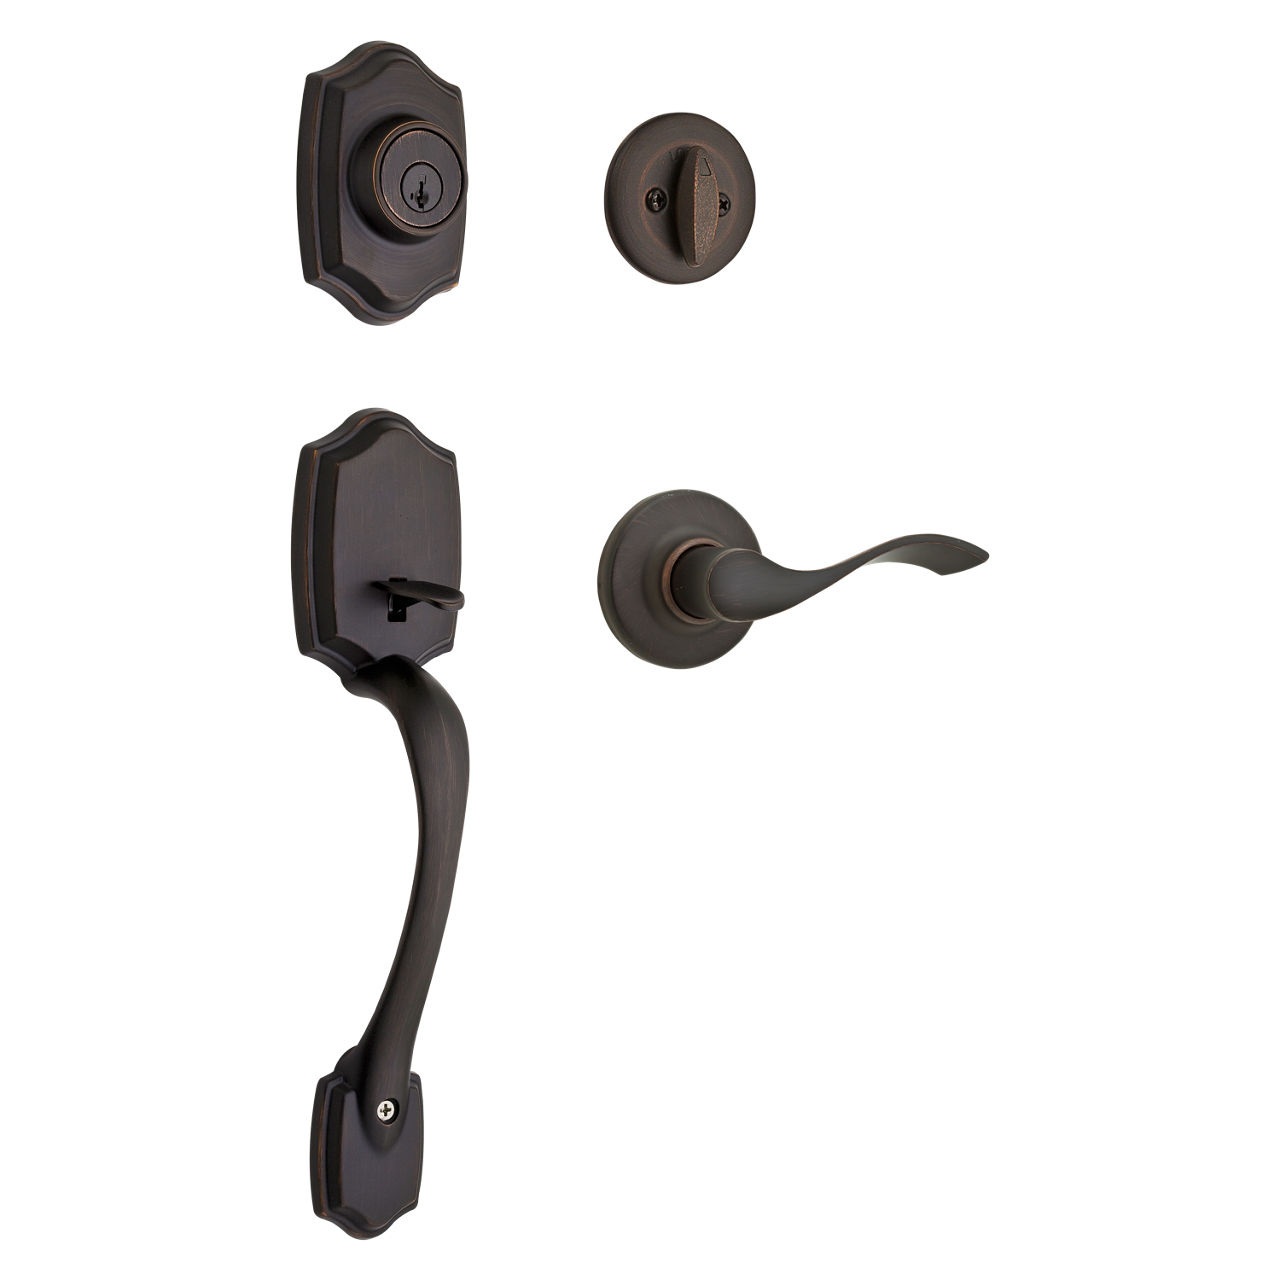 Brentwood Handleset with Belmont Lever - featuring SmartKey